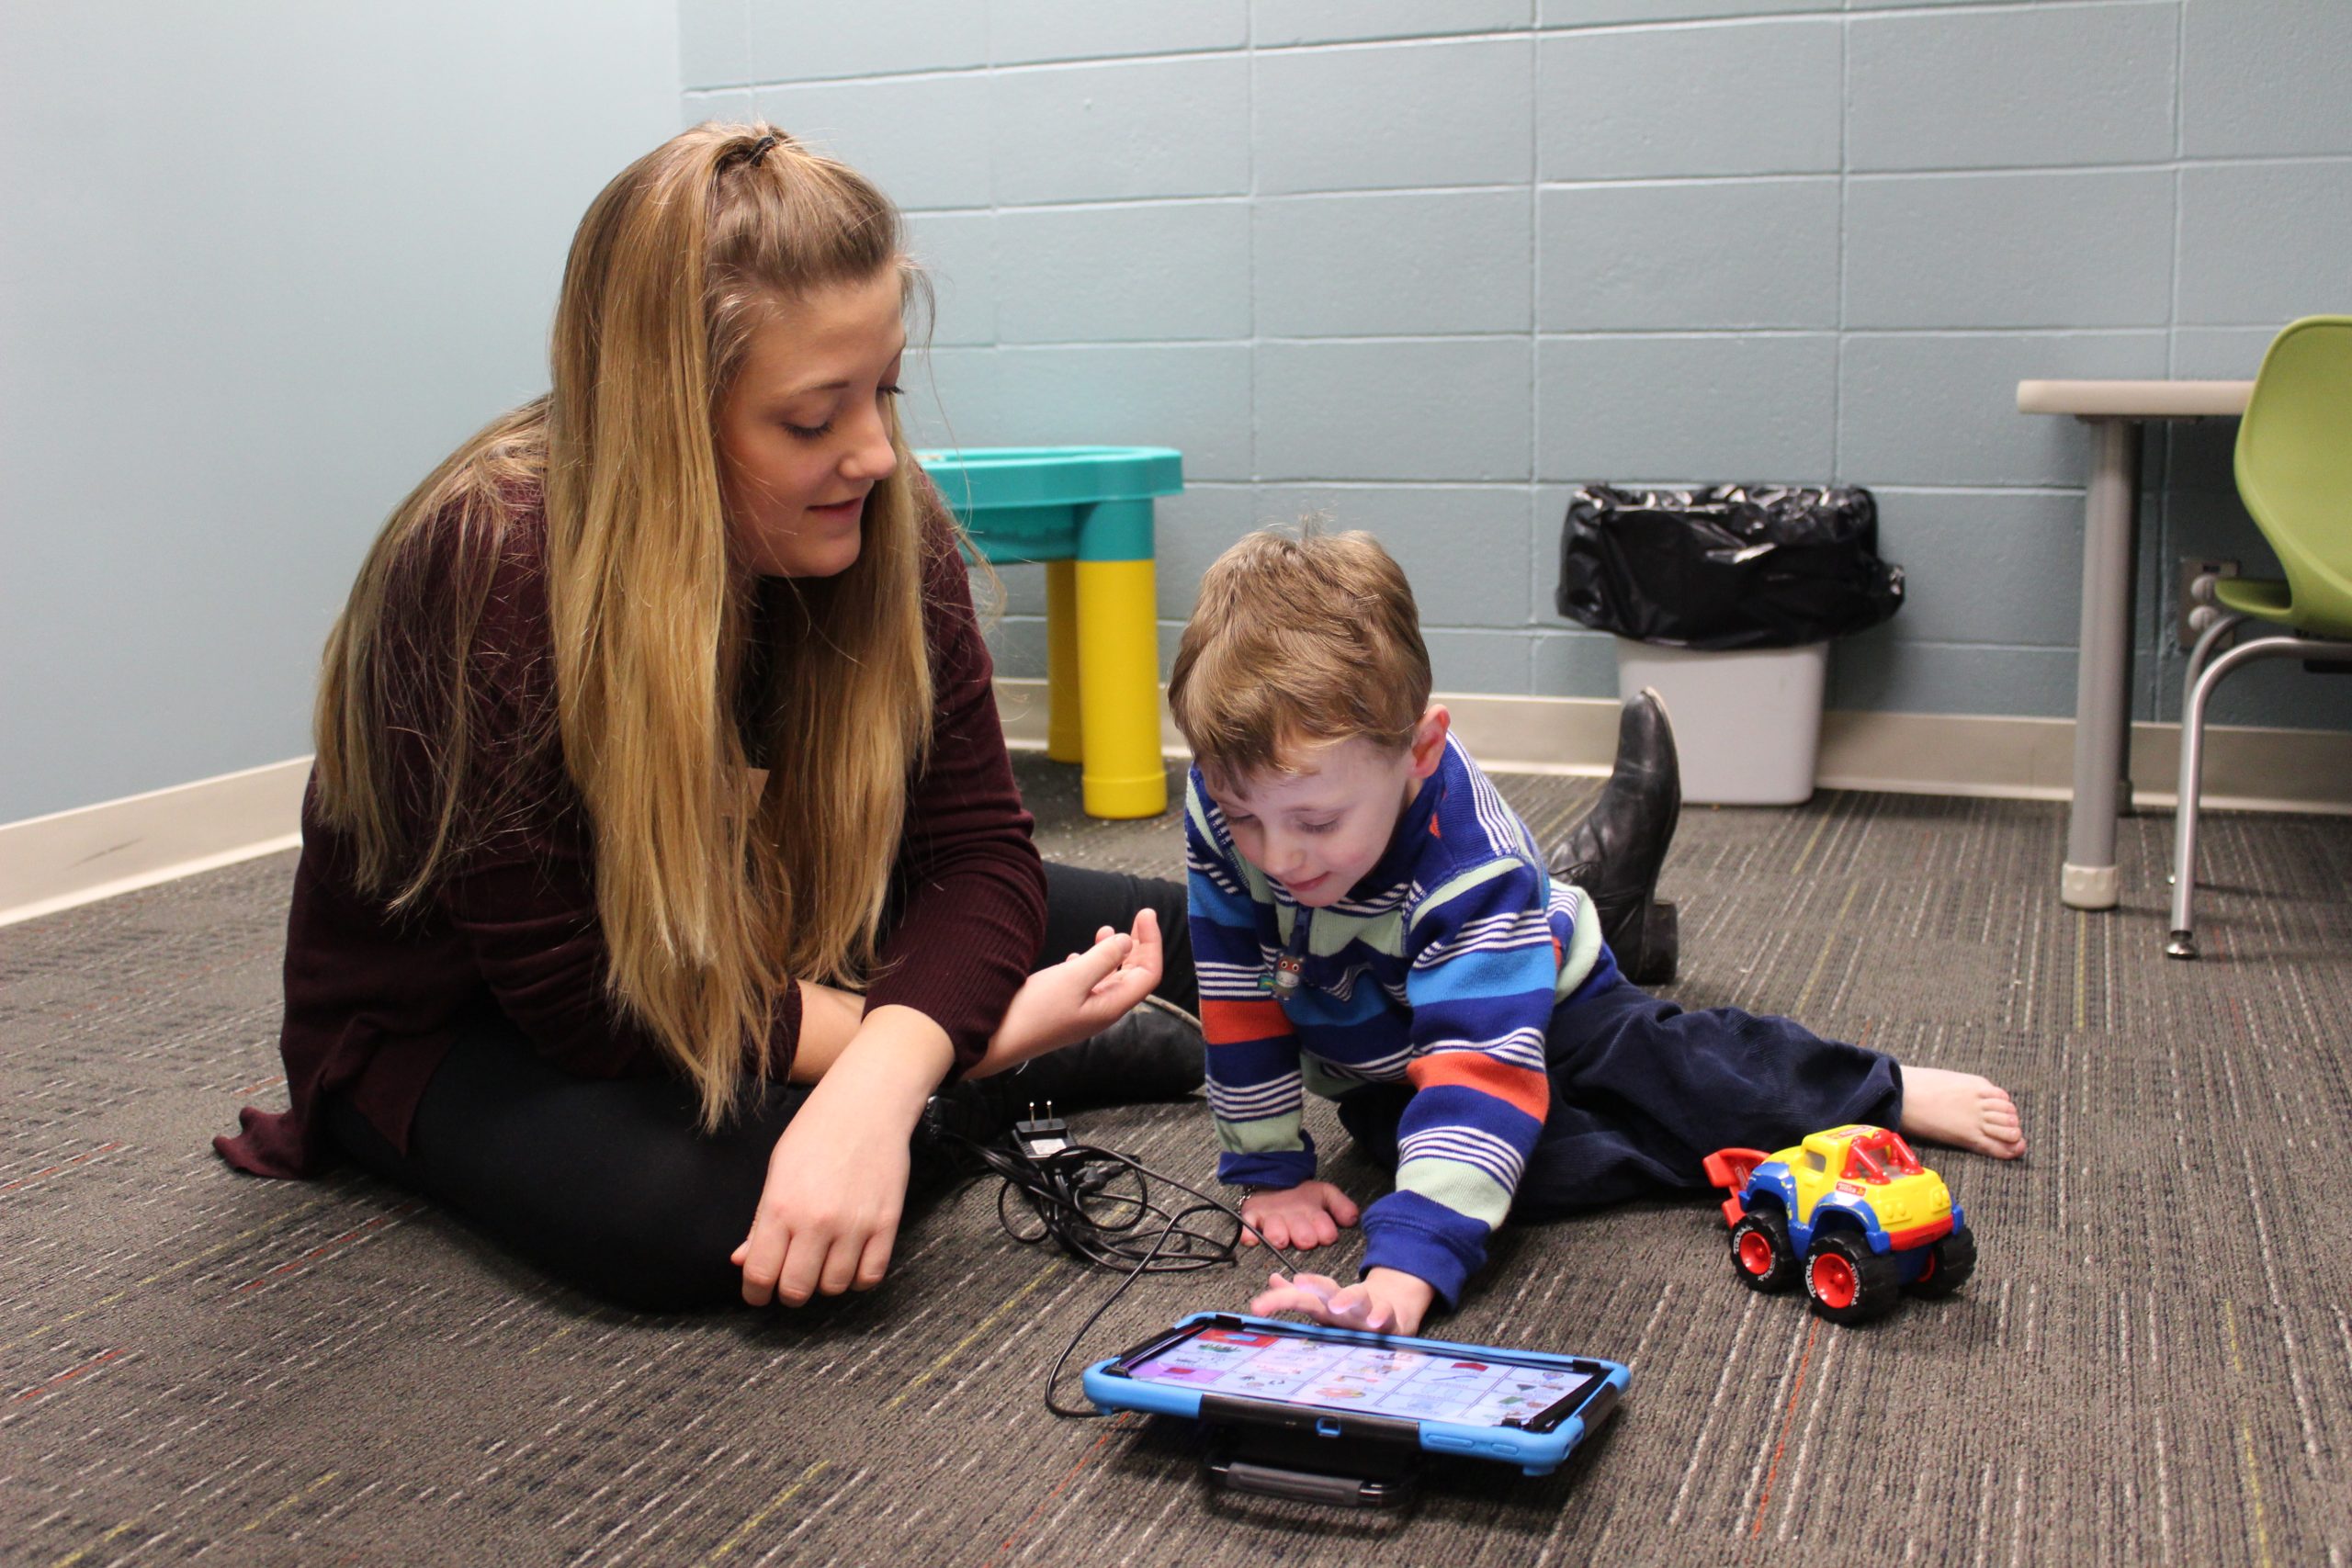 Girl shows child how to use an iPad with assistive technology